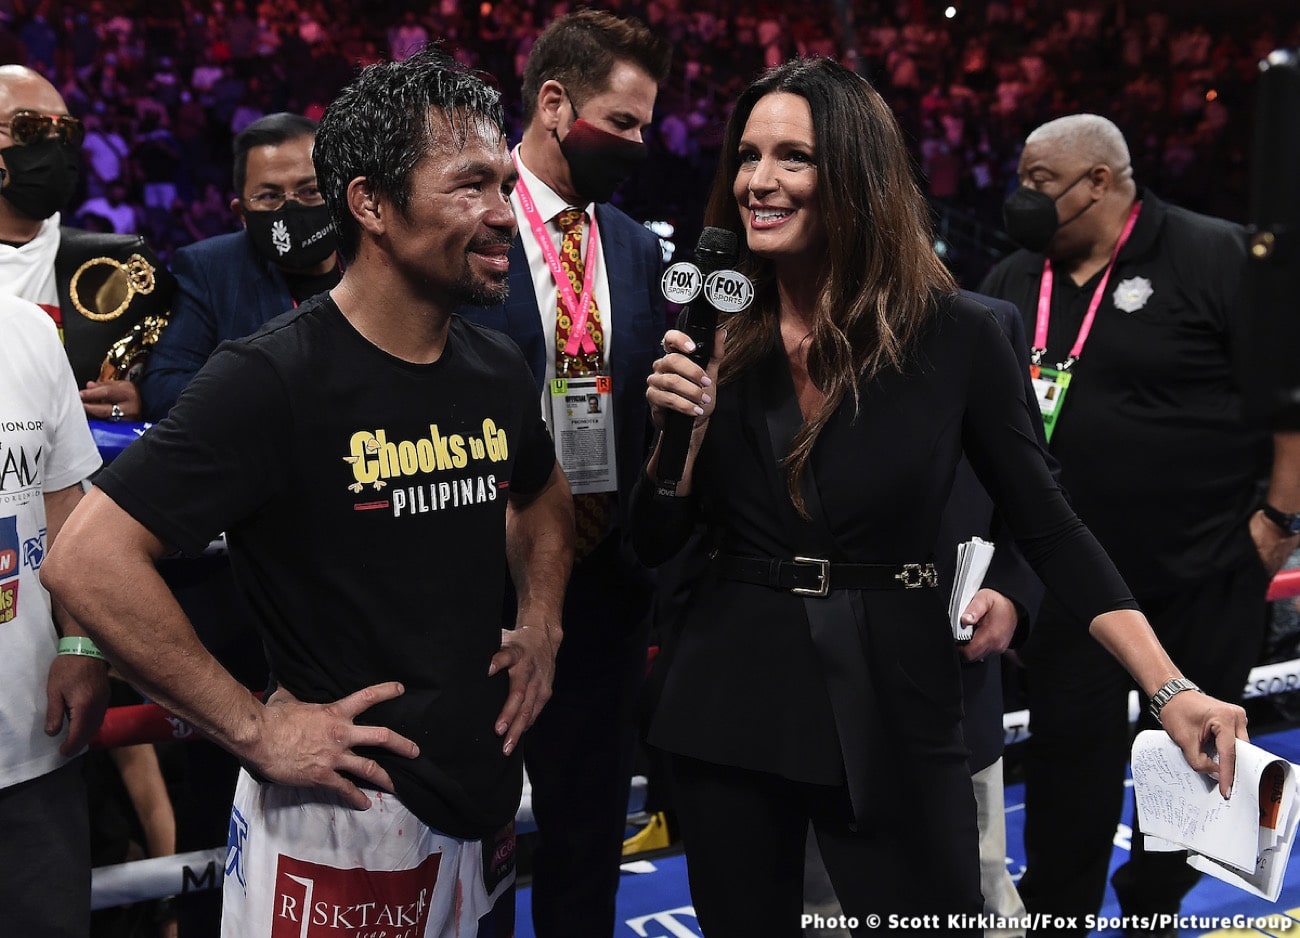 Image: Manny Pacquiao not retiring yet says adviser Sean Gibbons